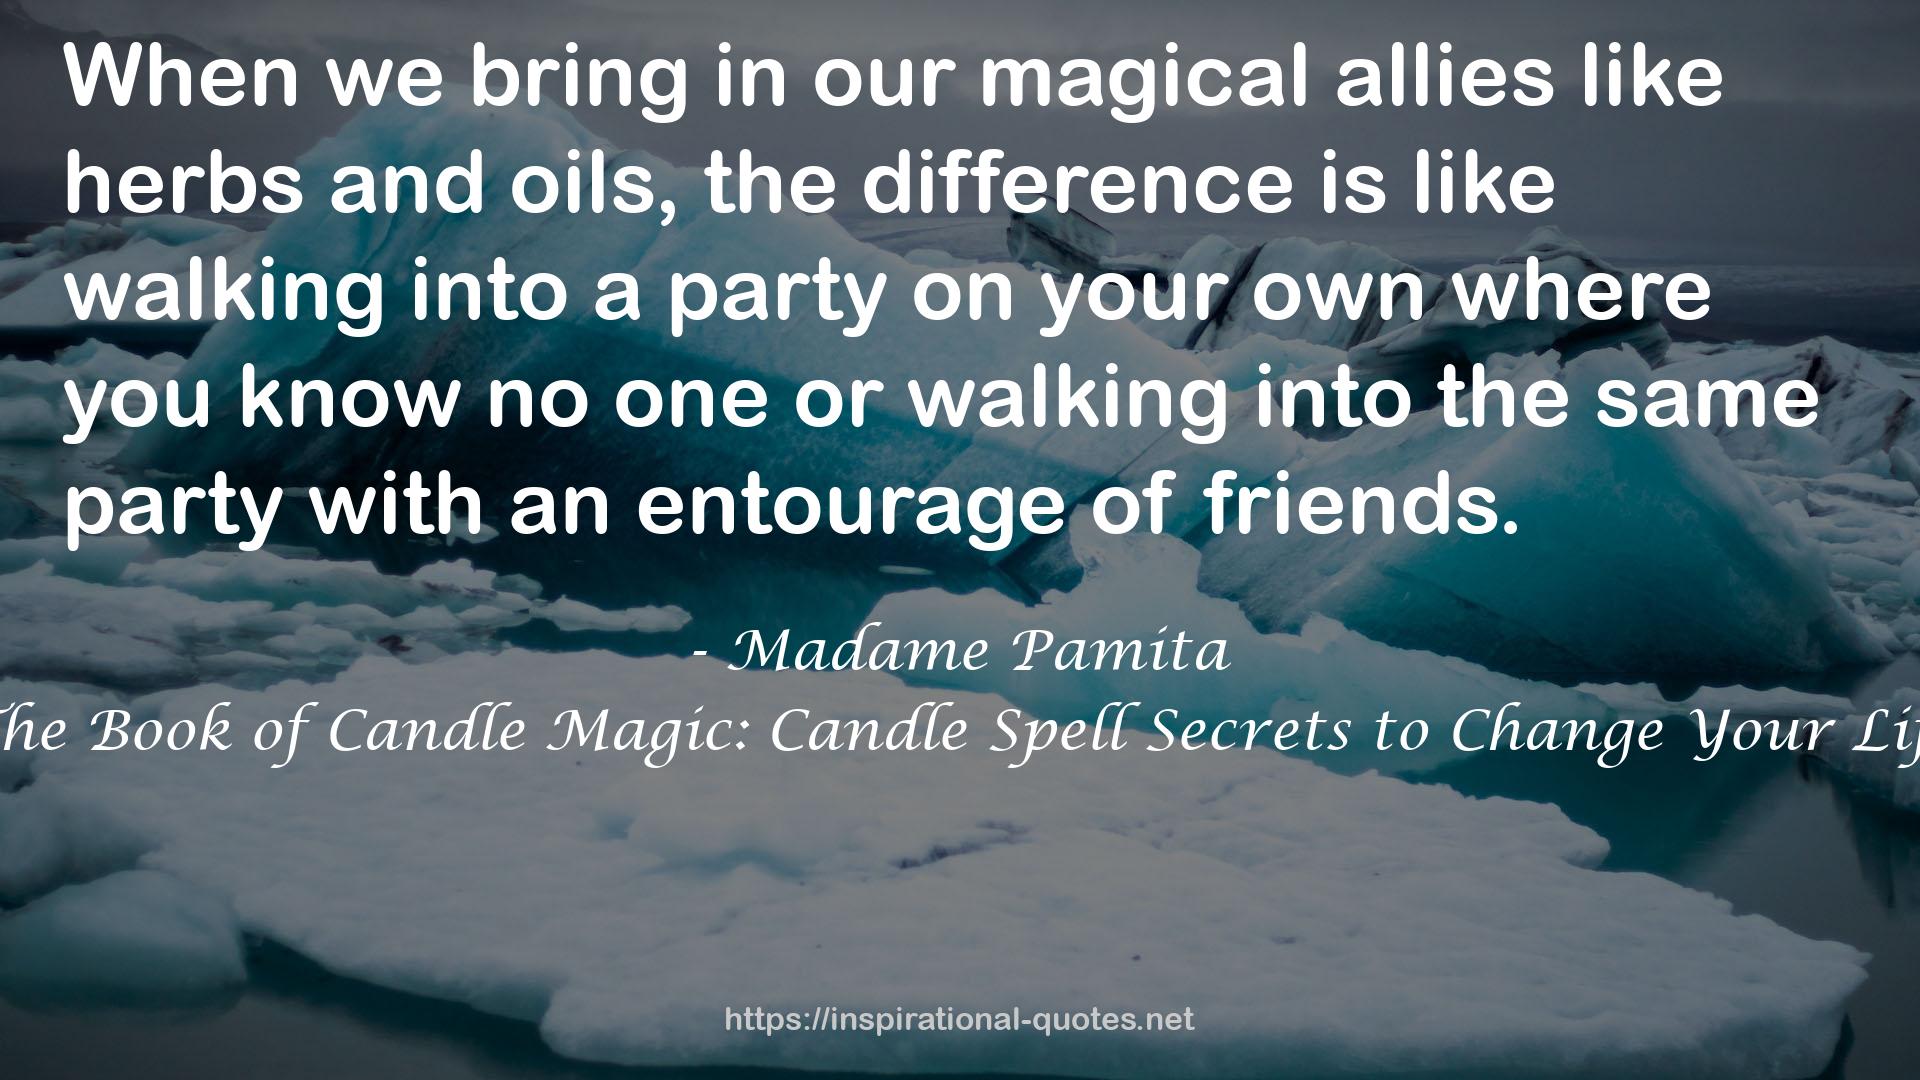 The Book of Candle Magic: Candle Spell Secrets to Change Your Life QUOTES